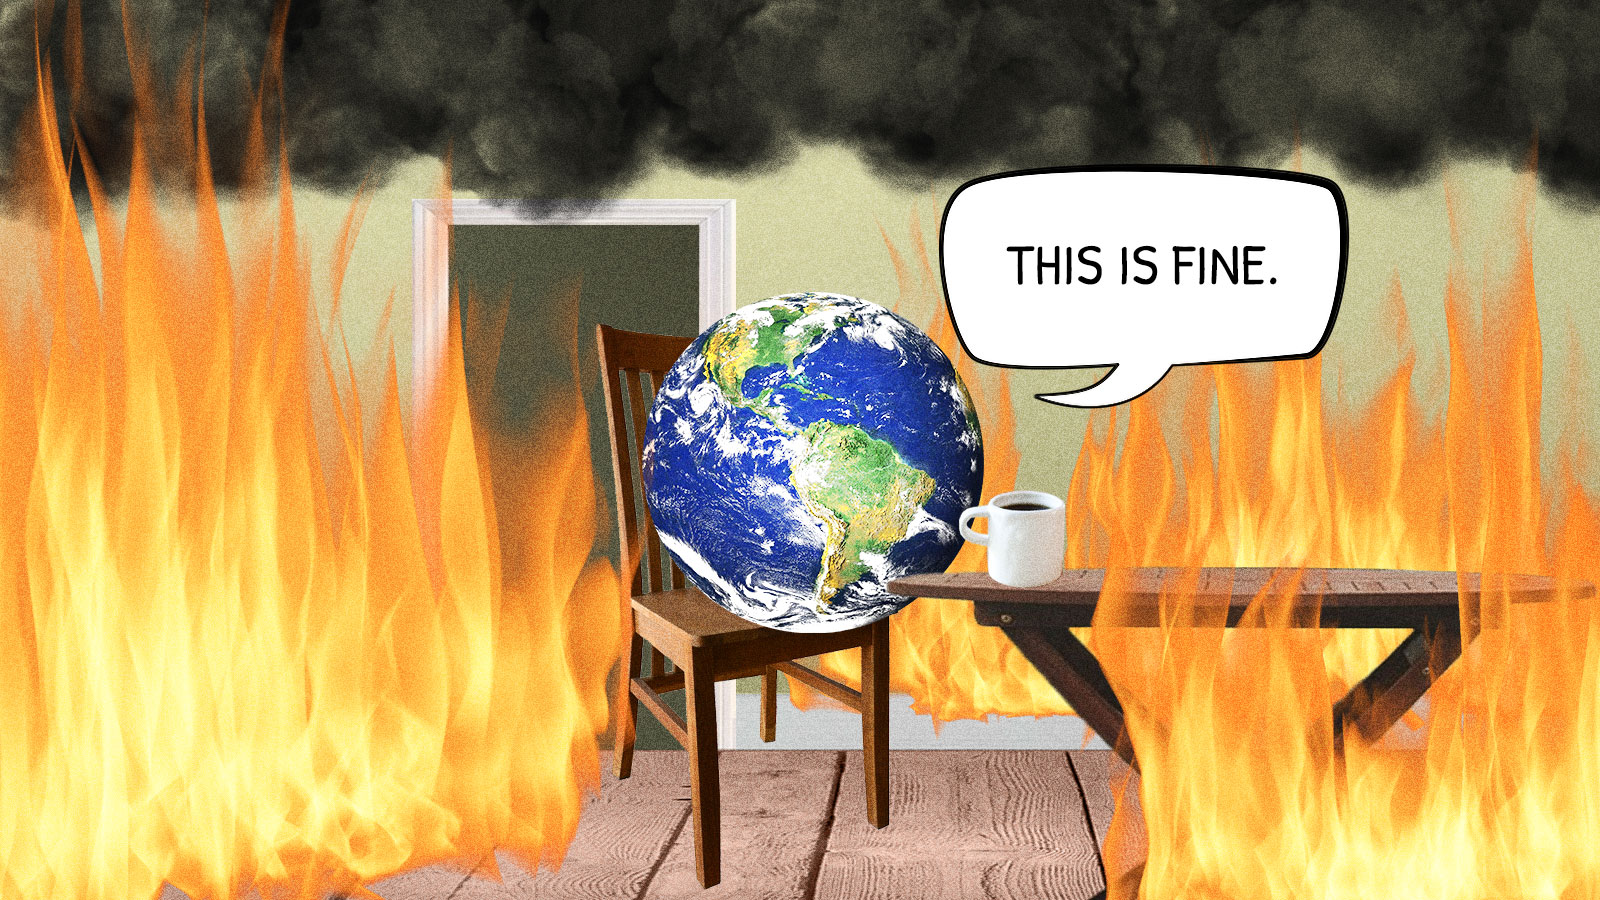 Photoshopped collage of the earth sitting in a room filled with smoke and fire saying 